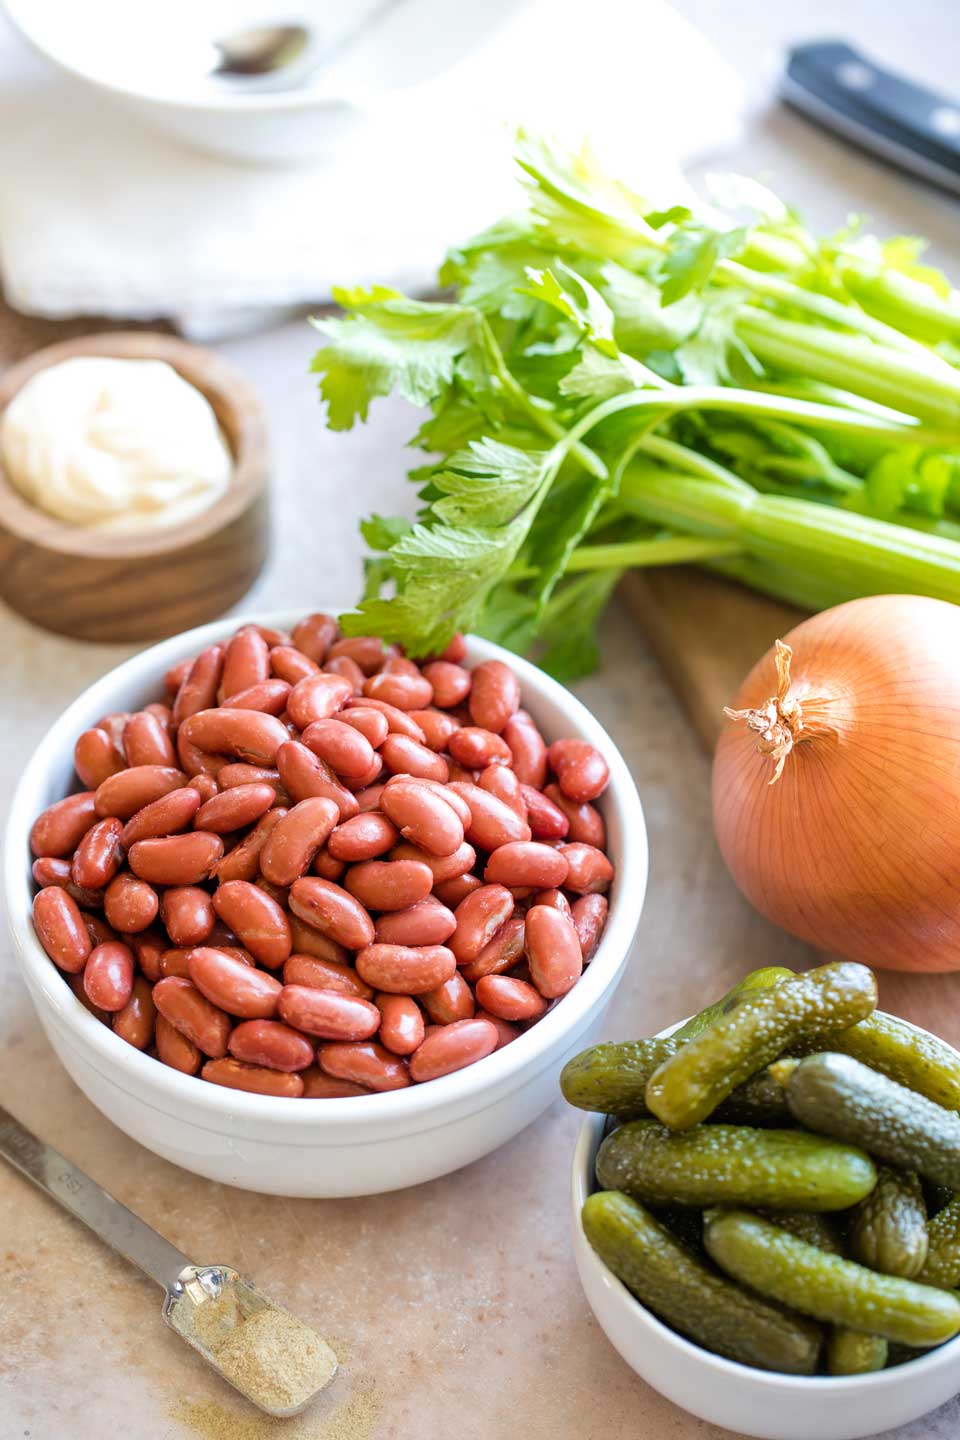 Ingredients for the salad: kidney beans and sweet pickles each in white bowls, an onion, stalks of celery, and a wooden bowl of mayo.